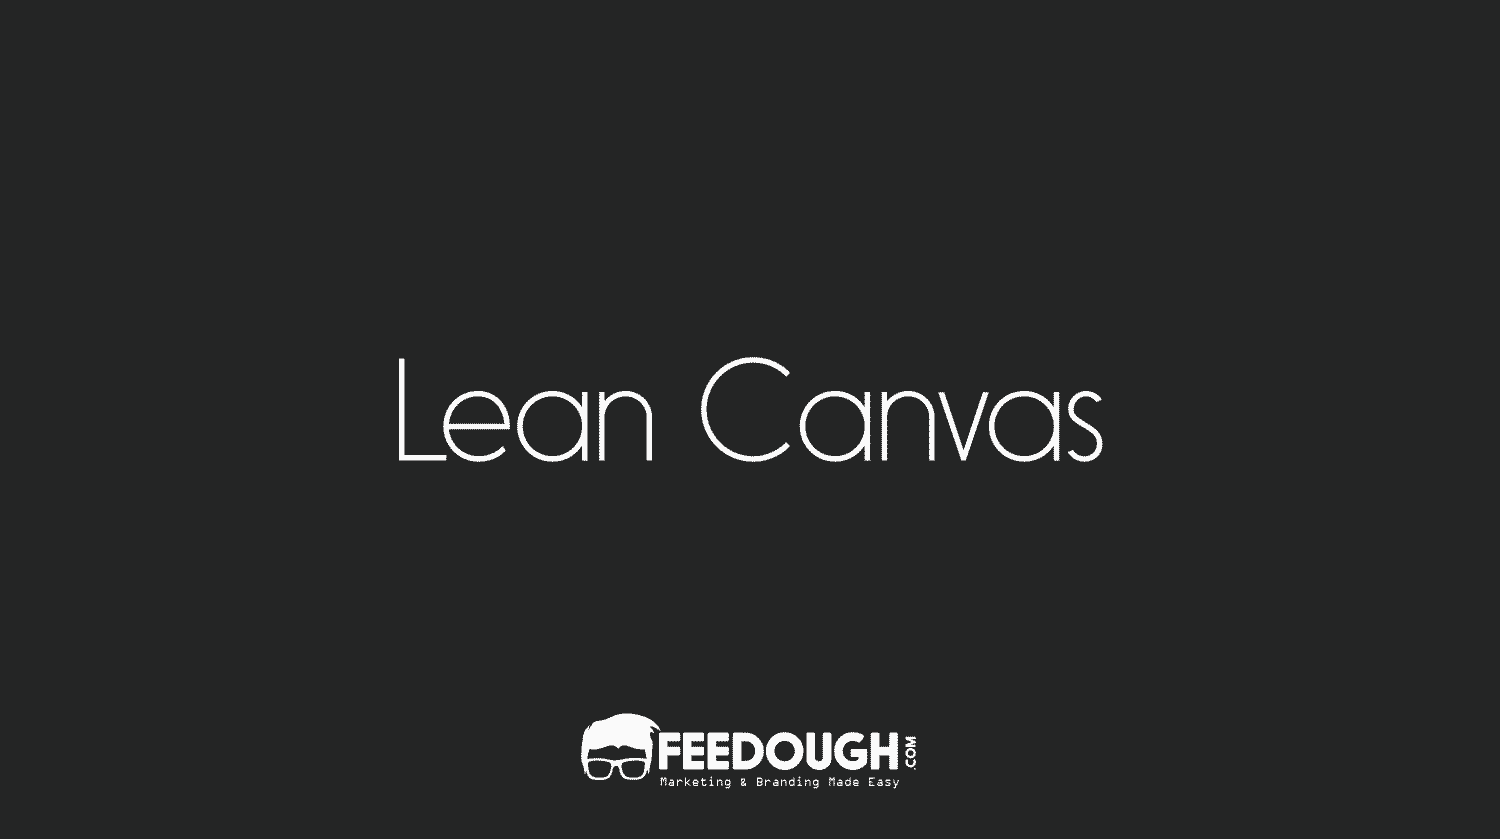 Lean Canvas: Everything You Should Know